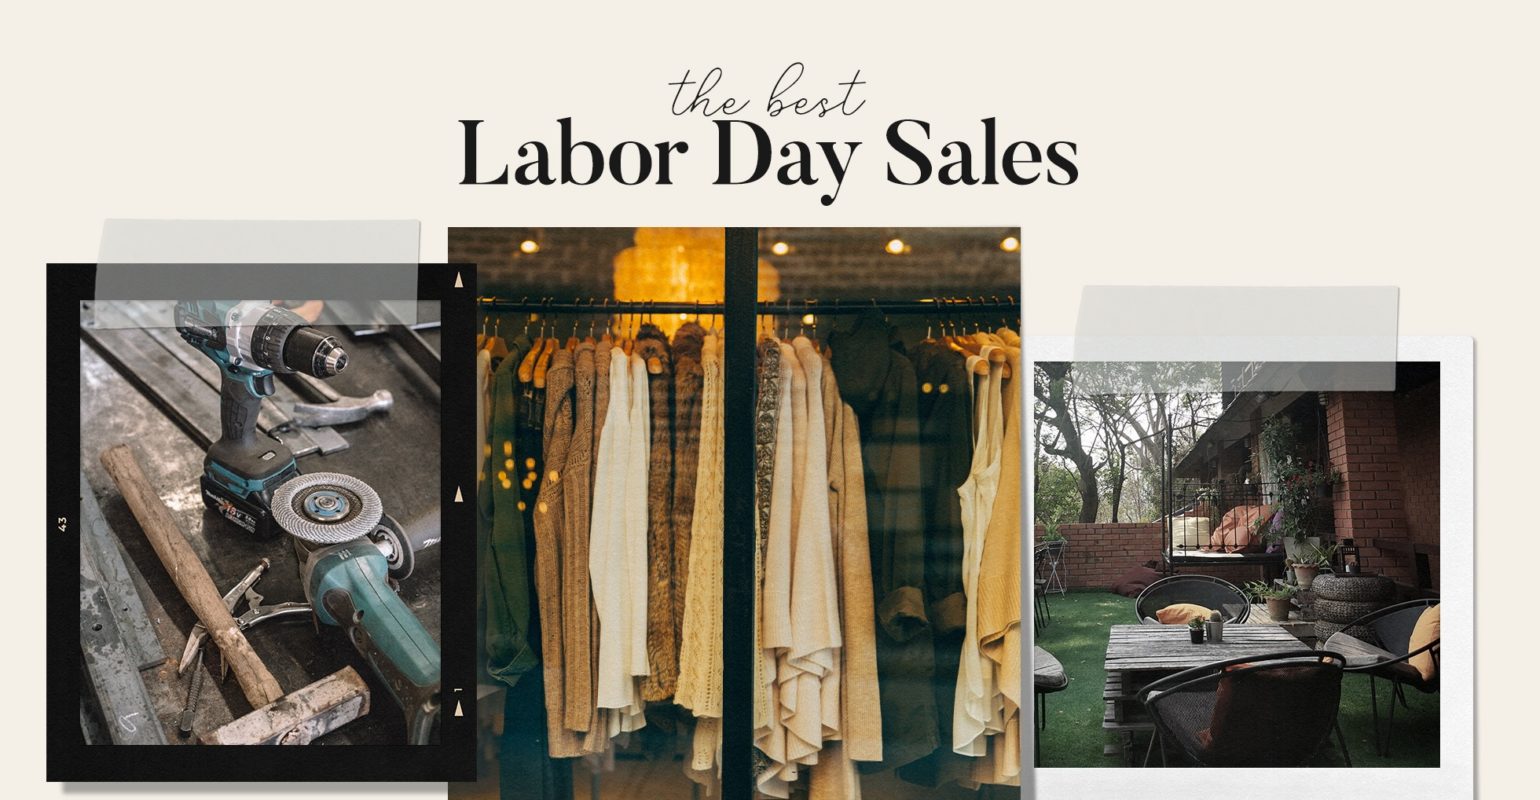 What Are The Best Labor Day Sales &#038; Deals for 2021?